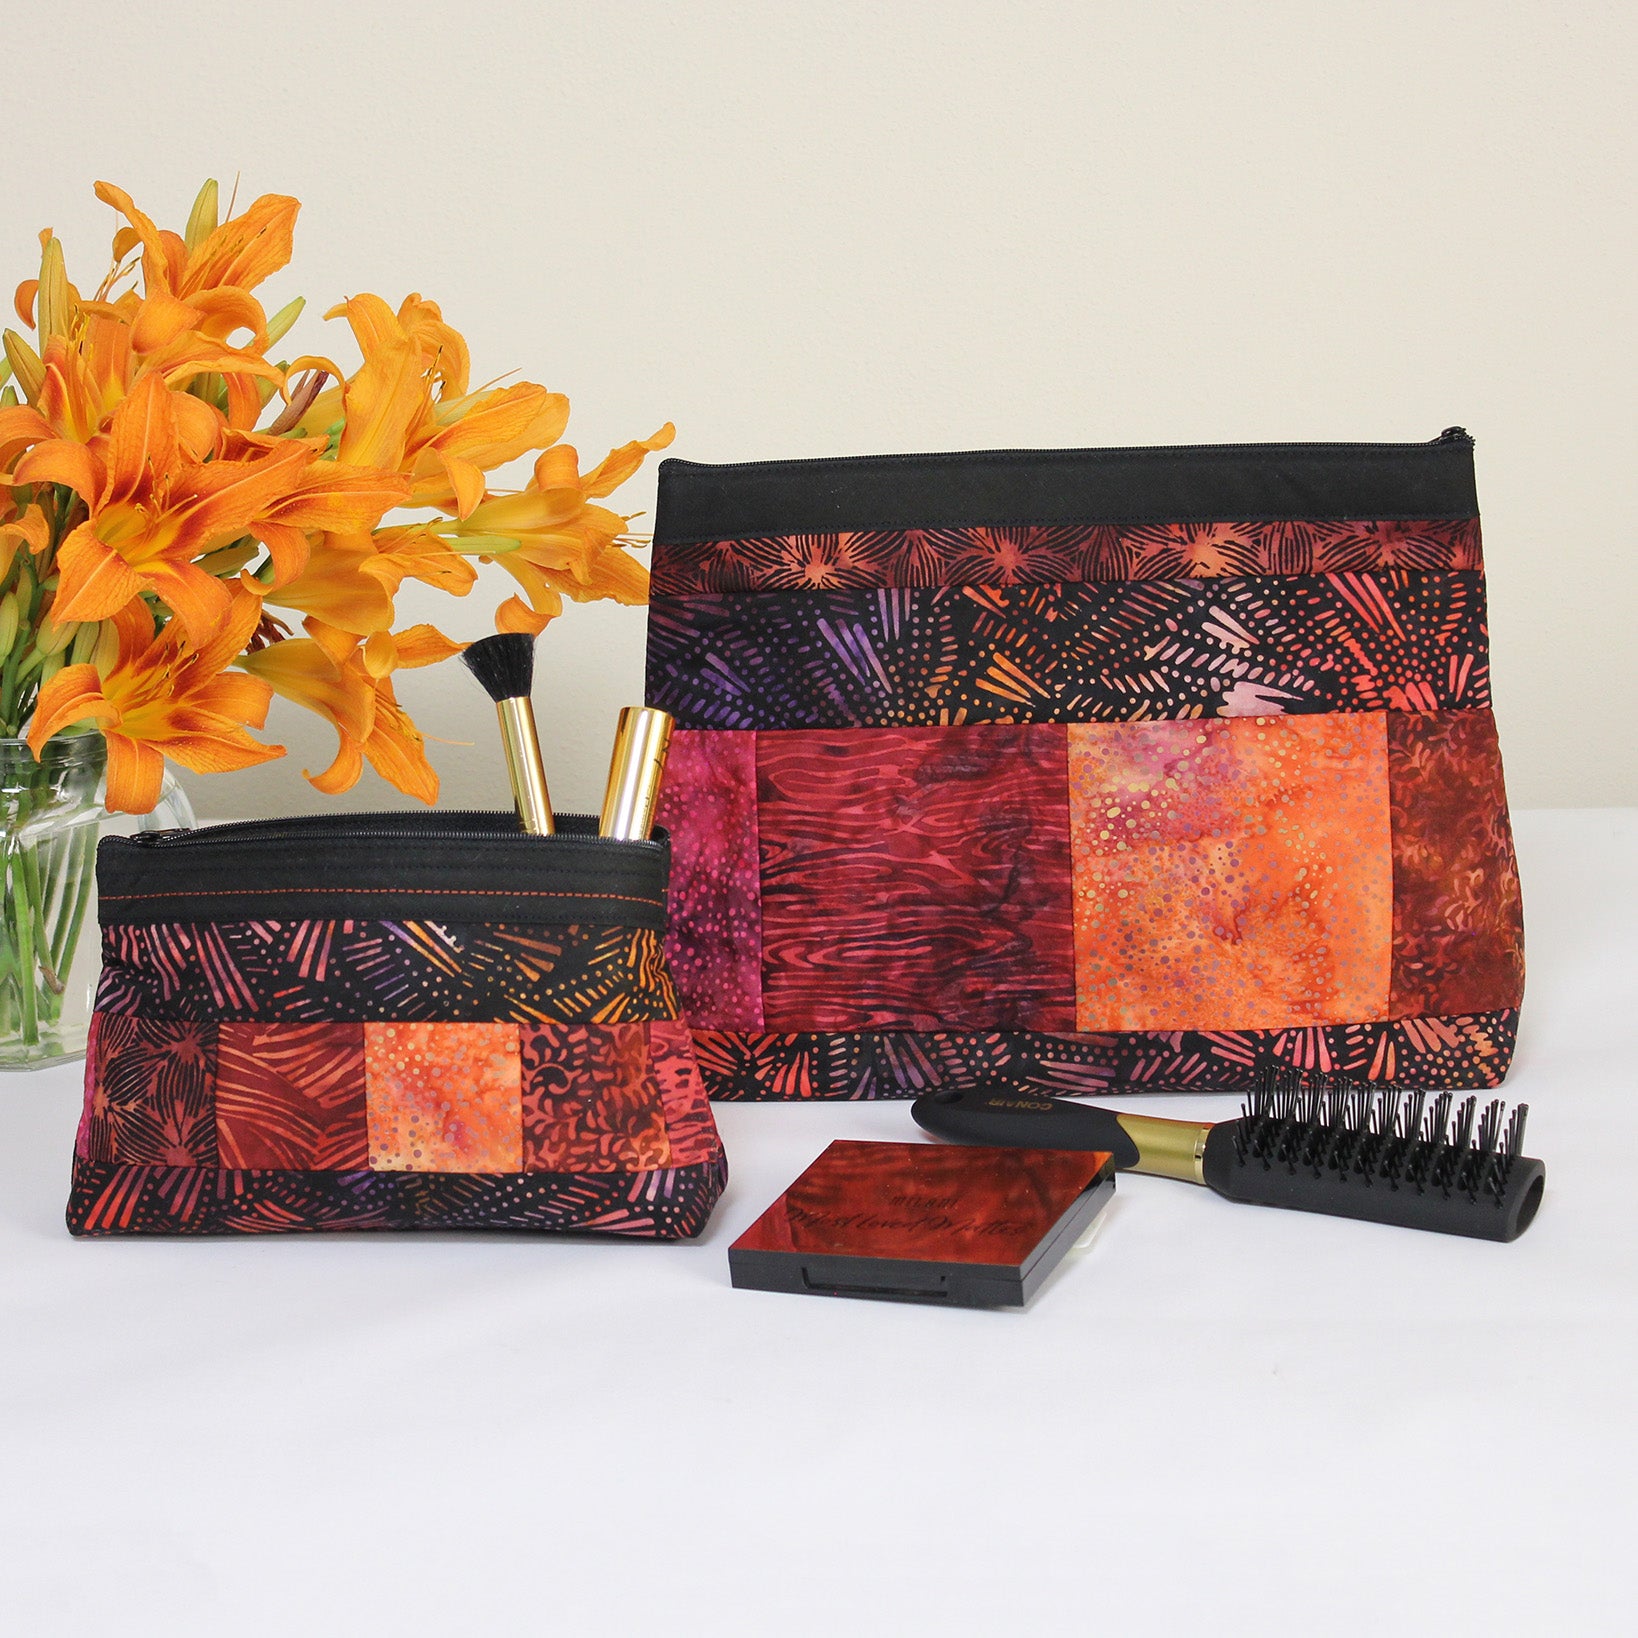 2023 June Tailor Collection-Zippity Do Done™ Cosmetic Bags (2) - QAYG Black zip-Kits with Zippity-Do-Done™